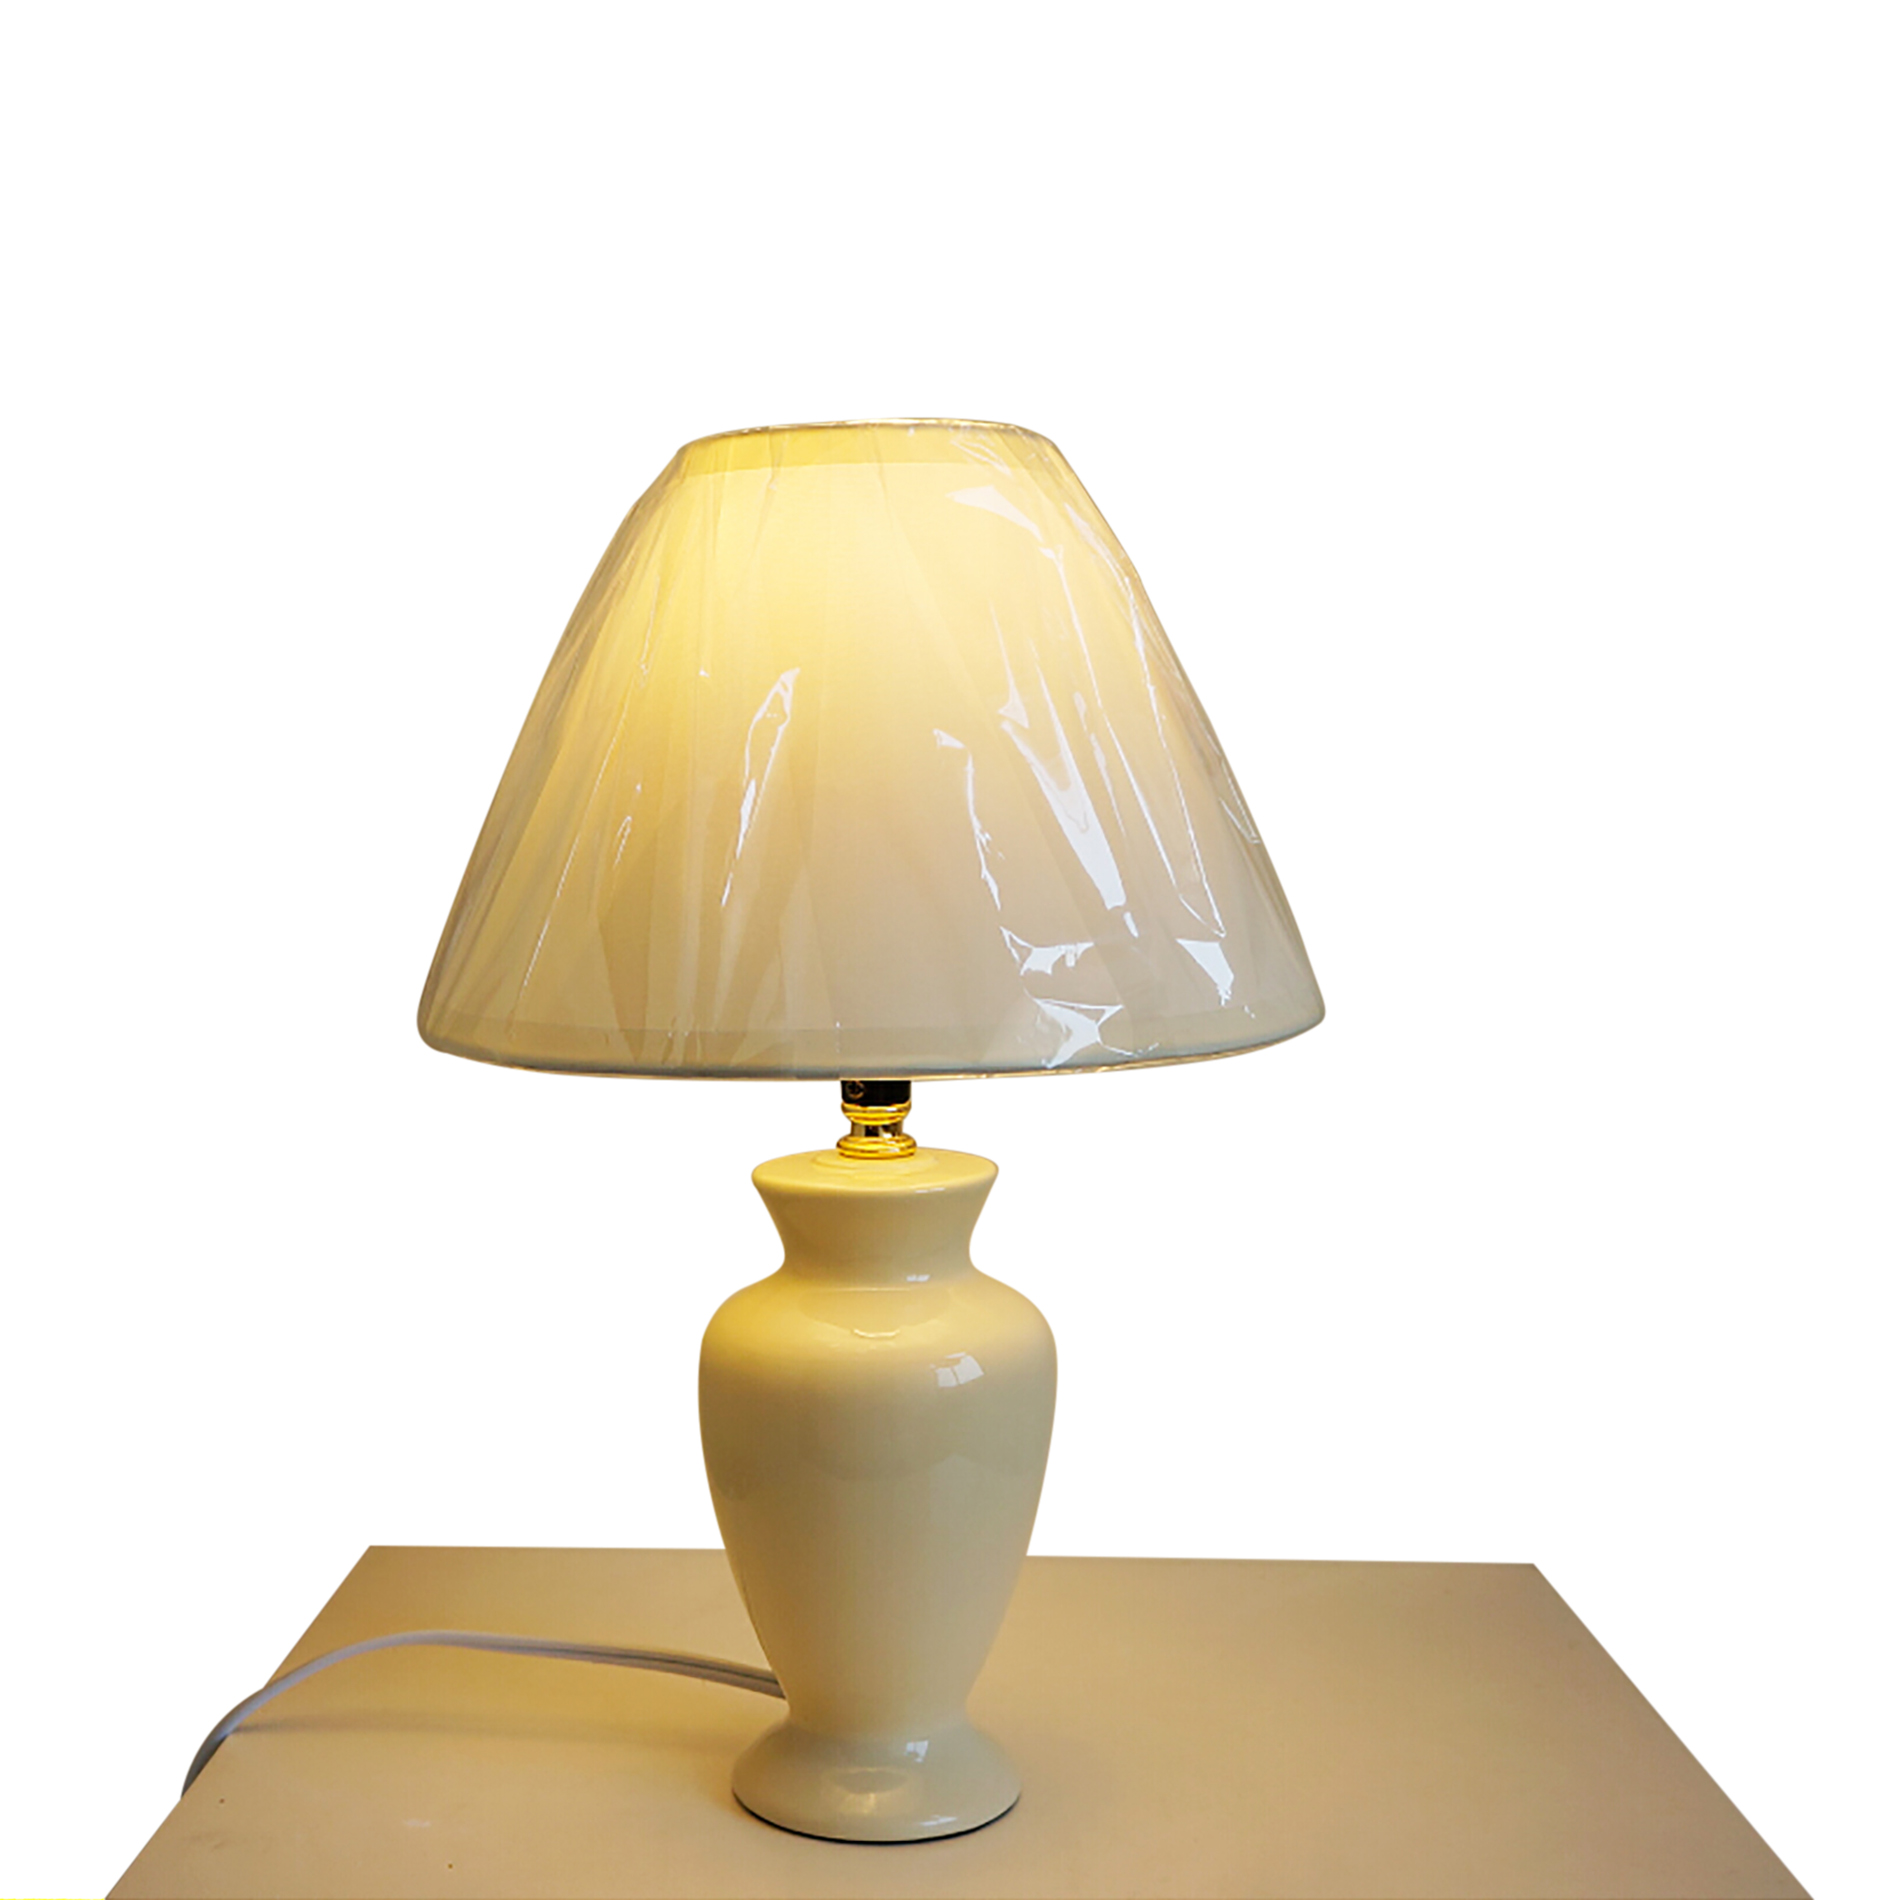 Essential Home Ceramic Vanity Lamp with CFL Bulb